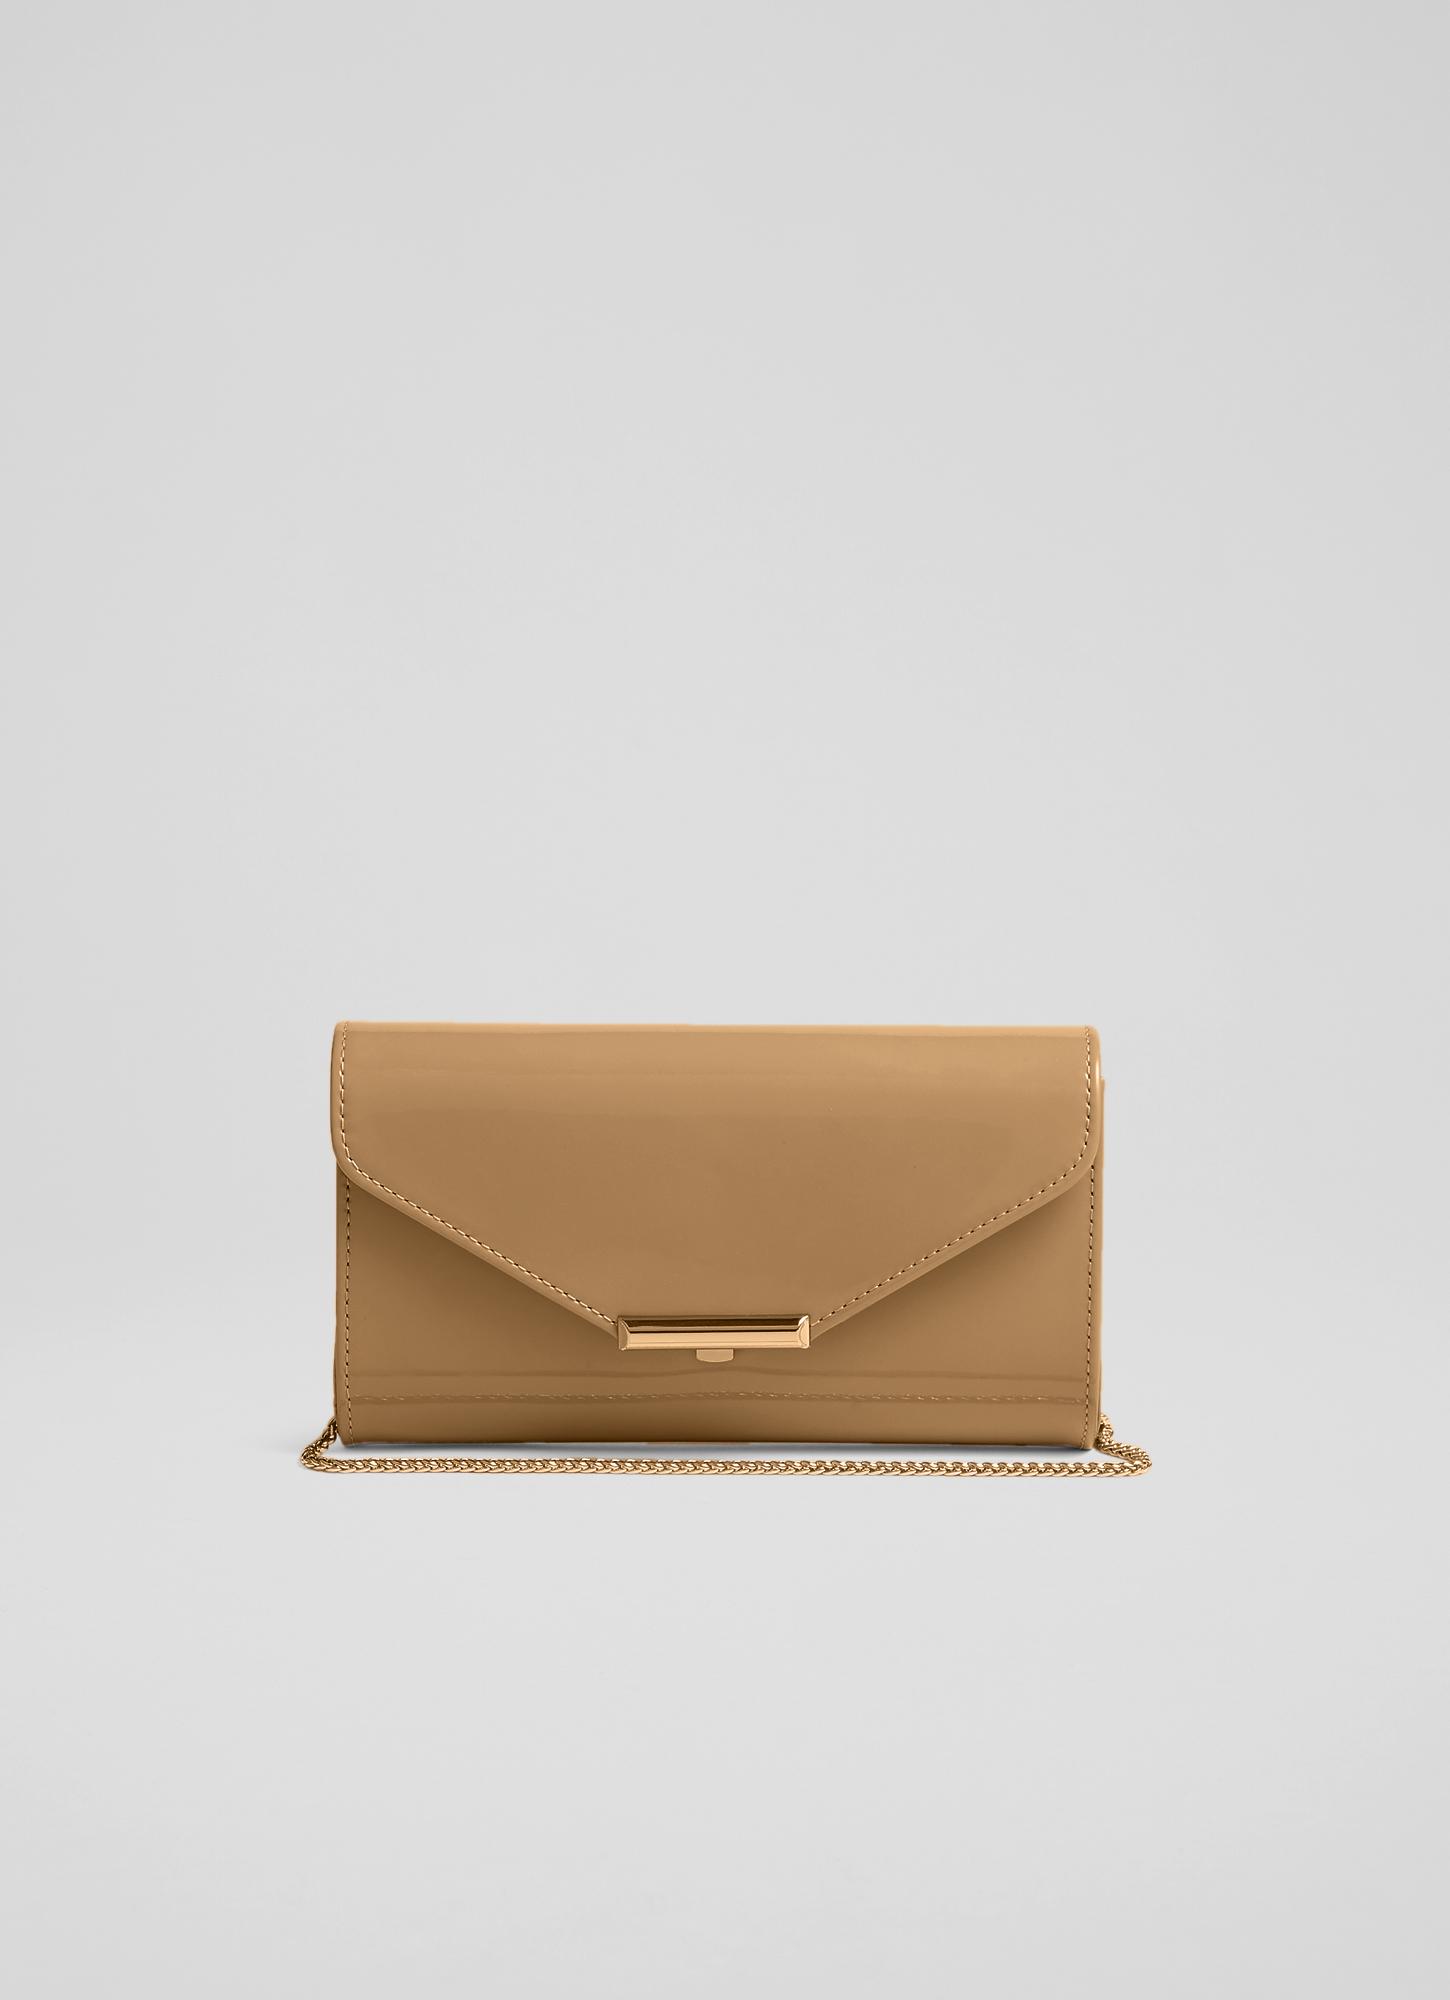 L.K.Bennett Lucy Beige Patent Leather Clutch, Natural